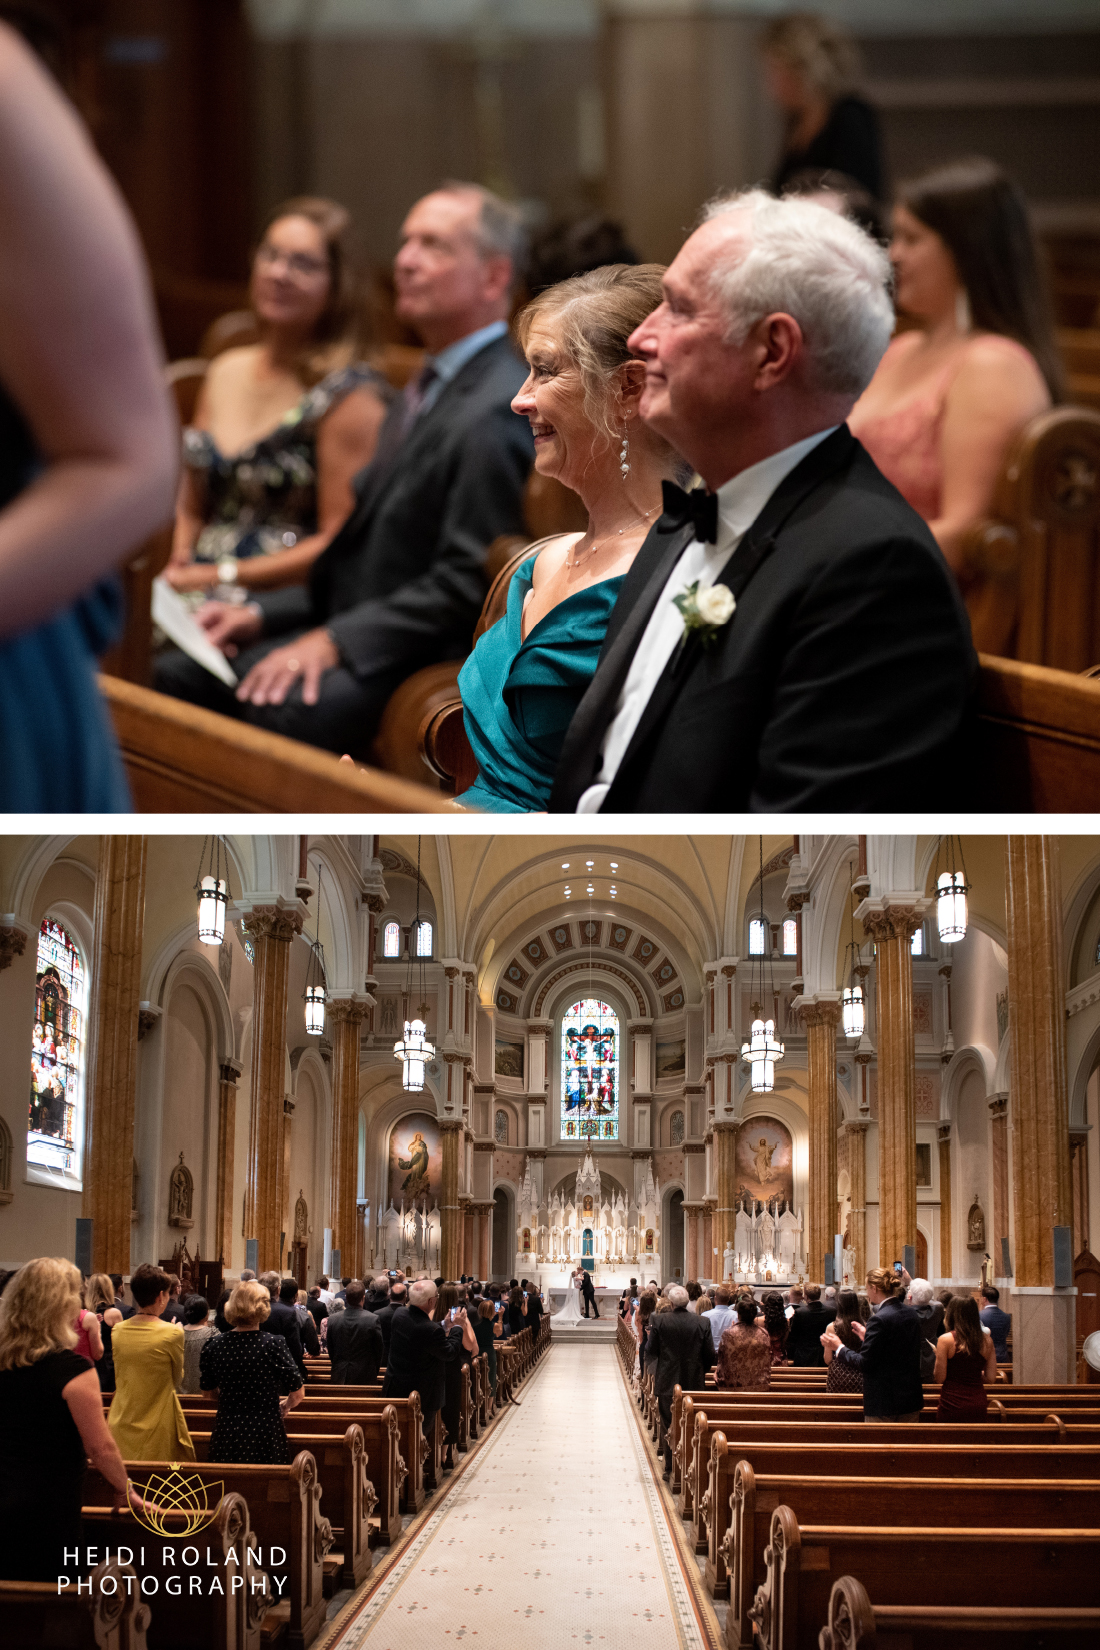 Family members of the bride and groom watching wedding ceremony at Saint Francis Xavier Church in Philly